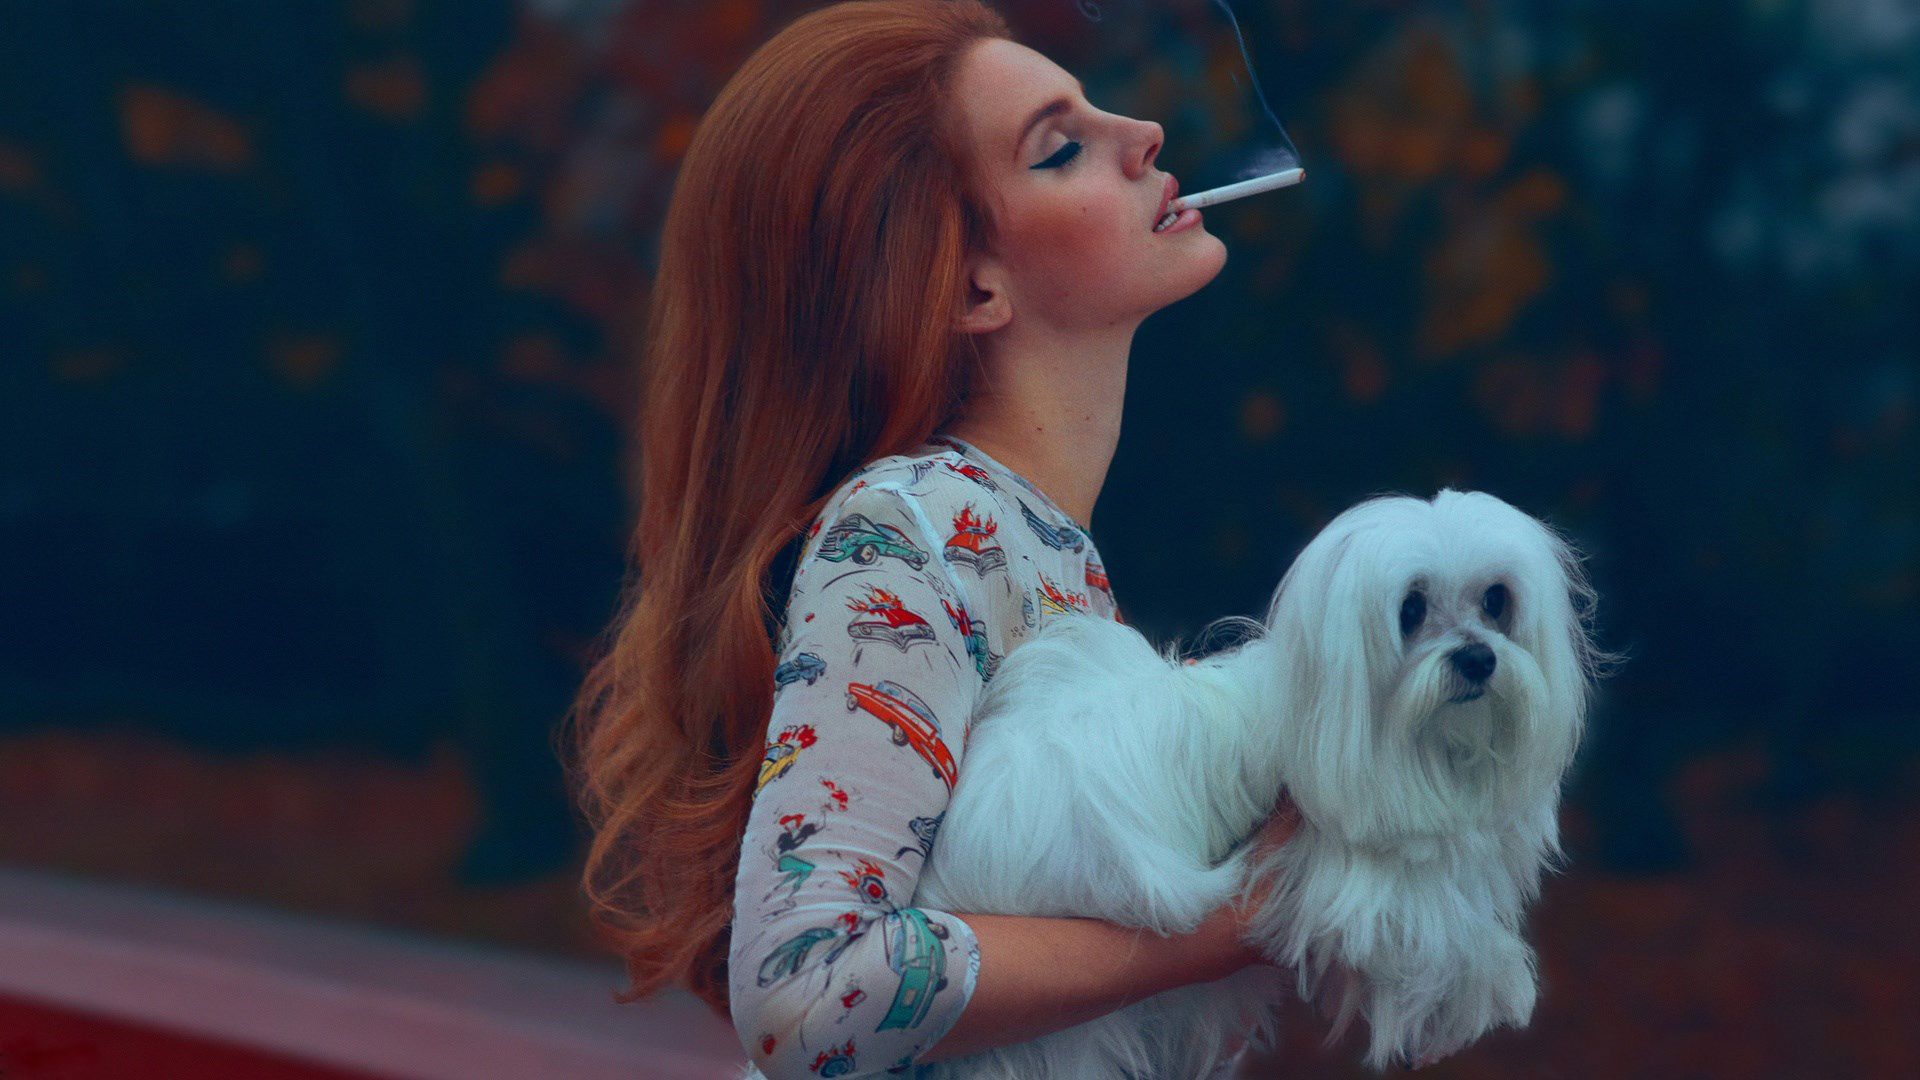 A woman holding her dog while smoking - Lana Del Rey